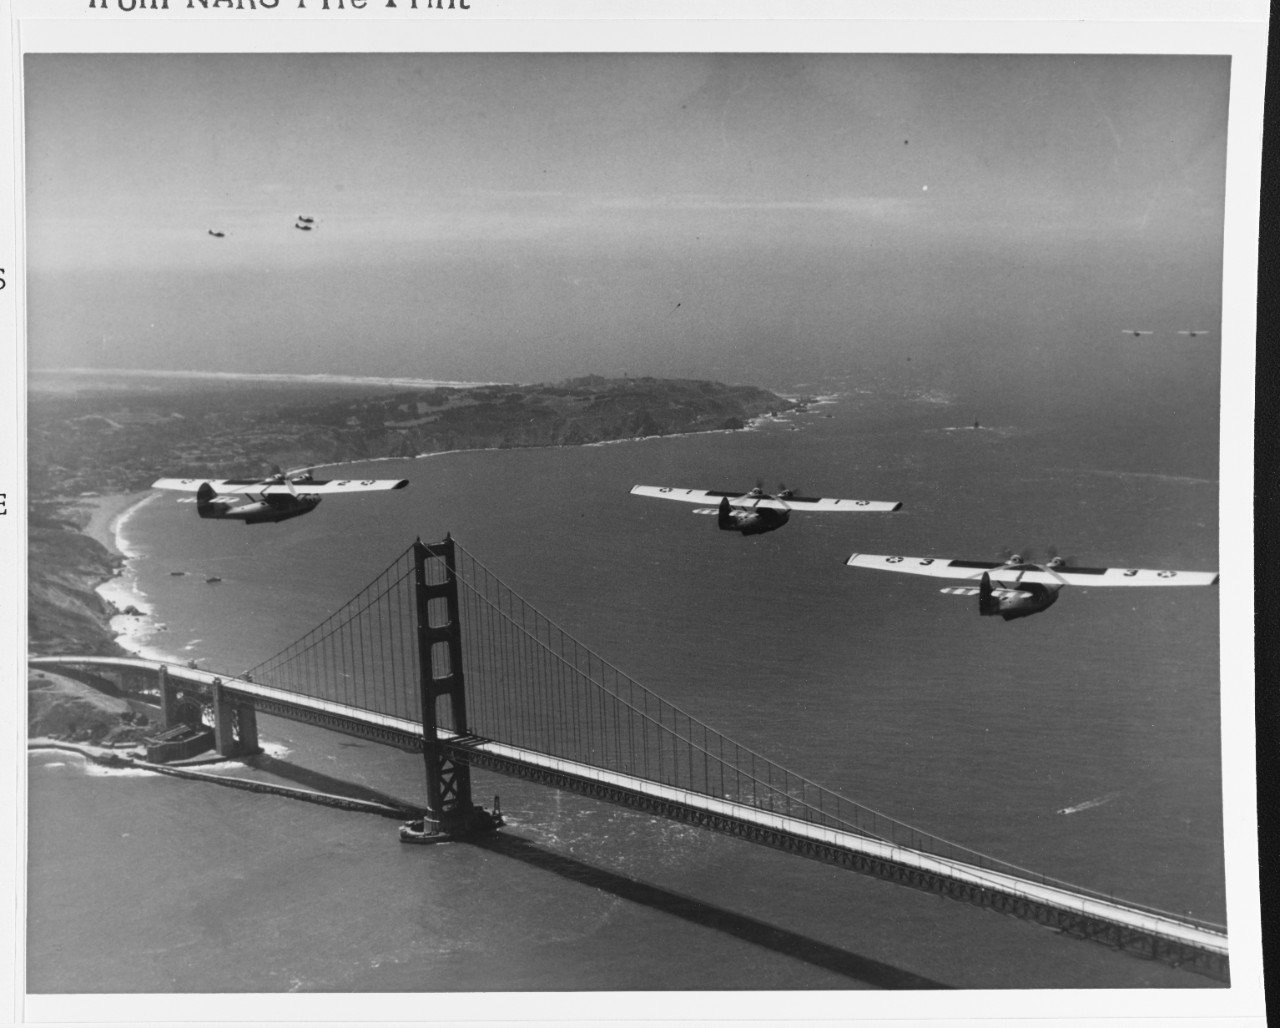 Consolidated PBY-1 "Catalina" patrol bombers